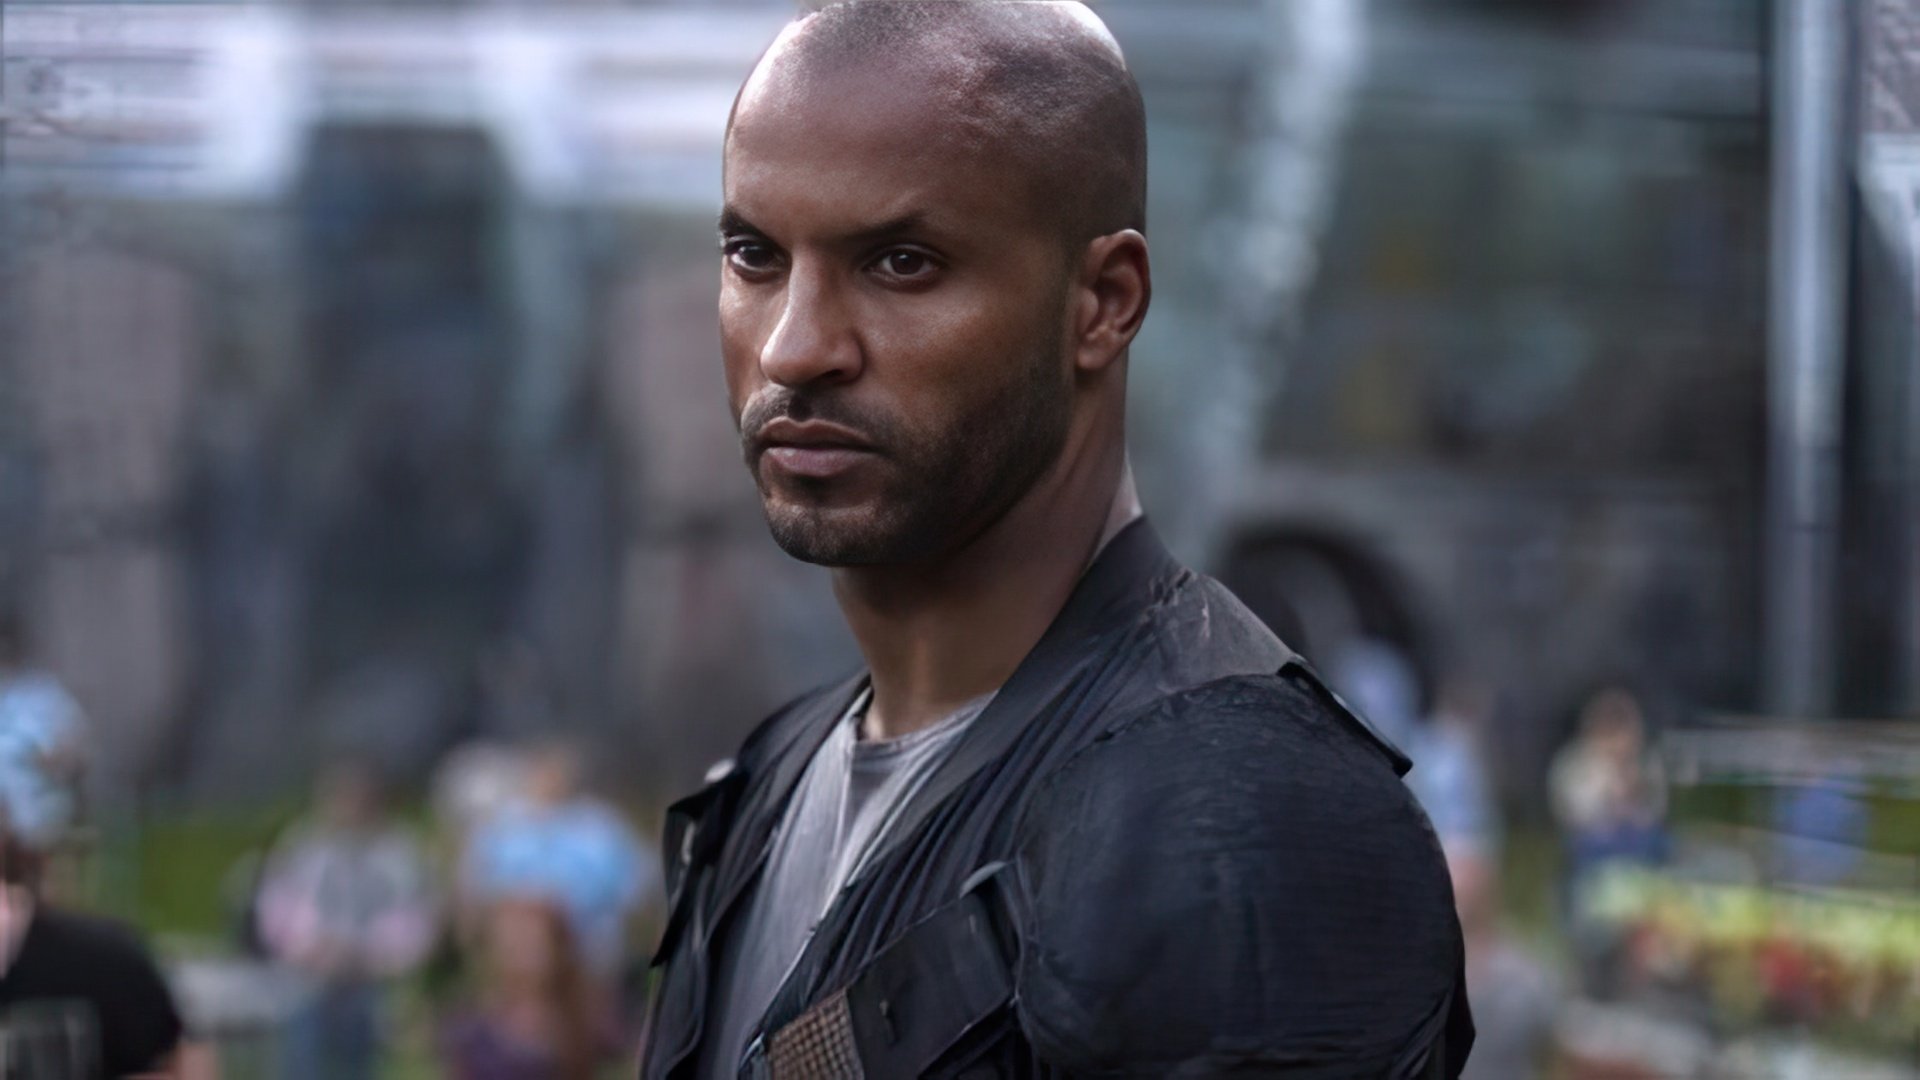 Ricky Whittle is not yet married